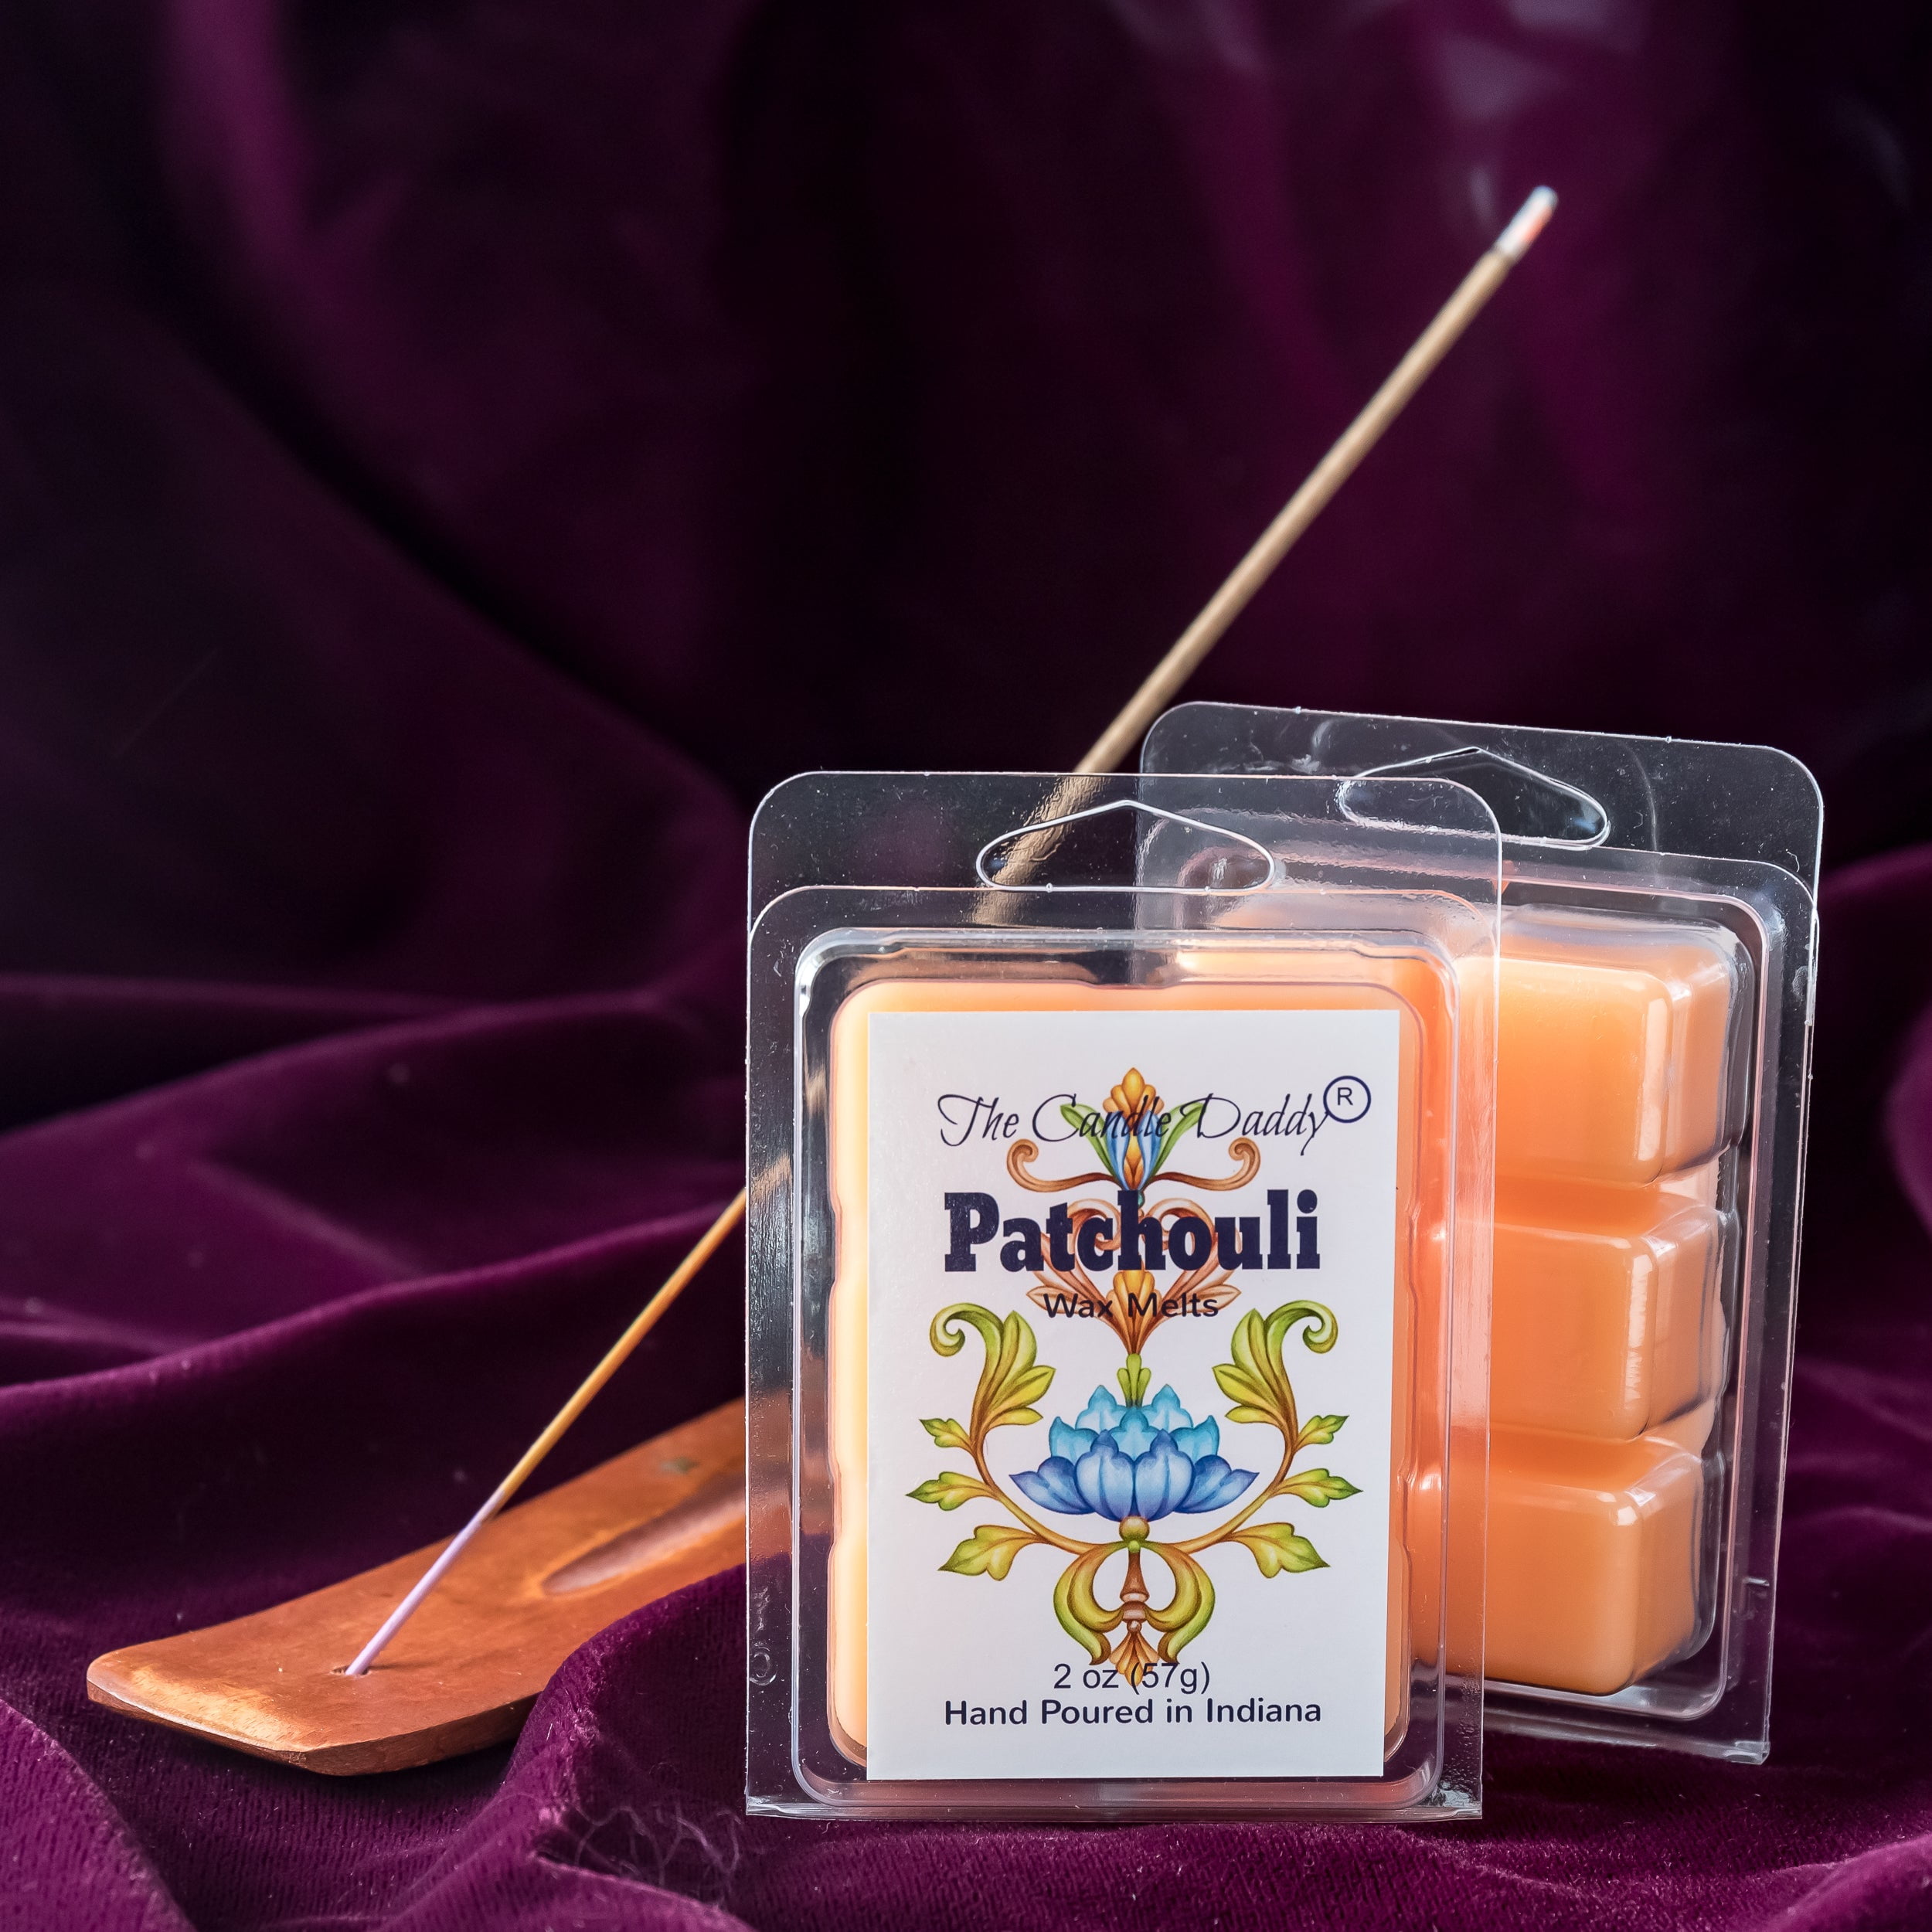 Patchouli Wax Melts Heart Shaped - 16 Highly Scented Wax Melts, Presentation Gift Box 3.2 oz Pack, Natural Candle, Soy Wax Melt Cubes Shaped As